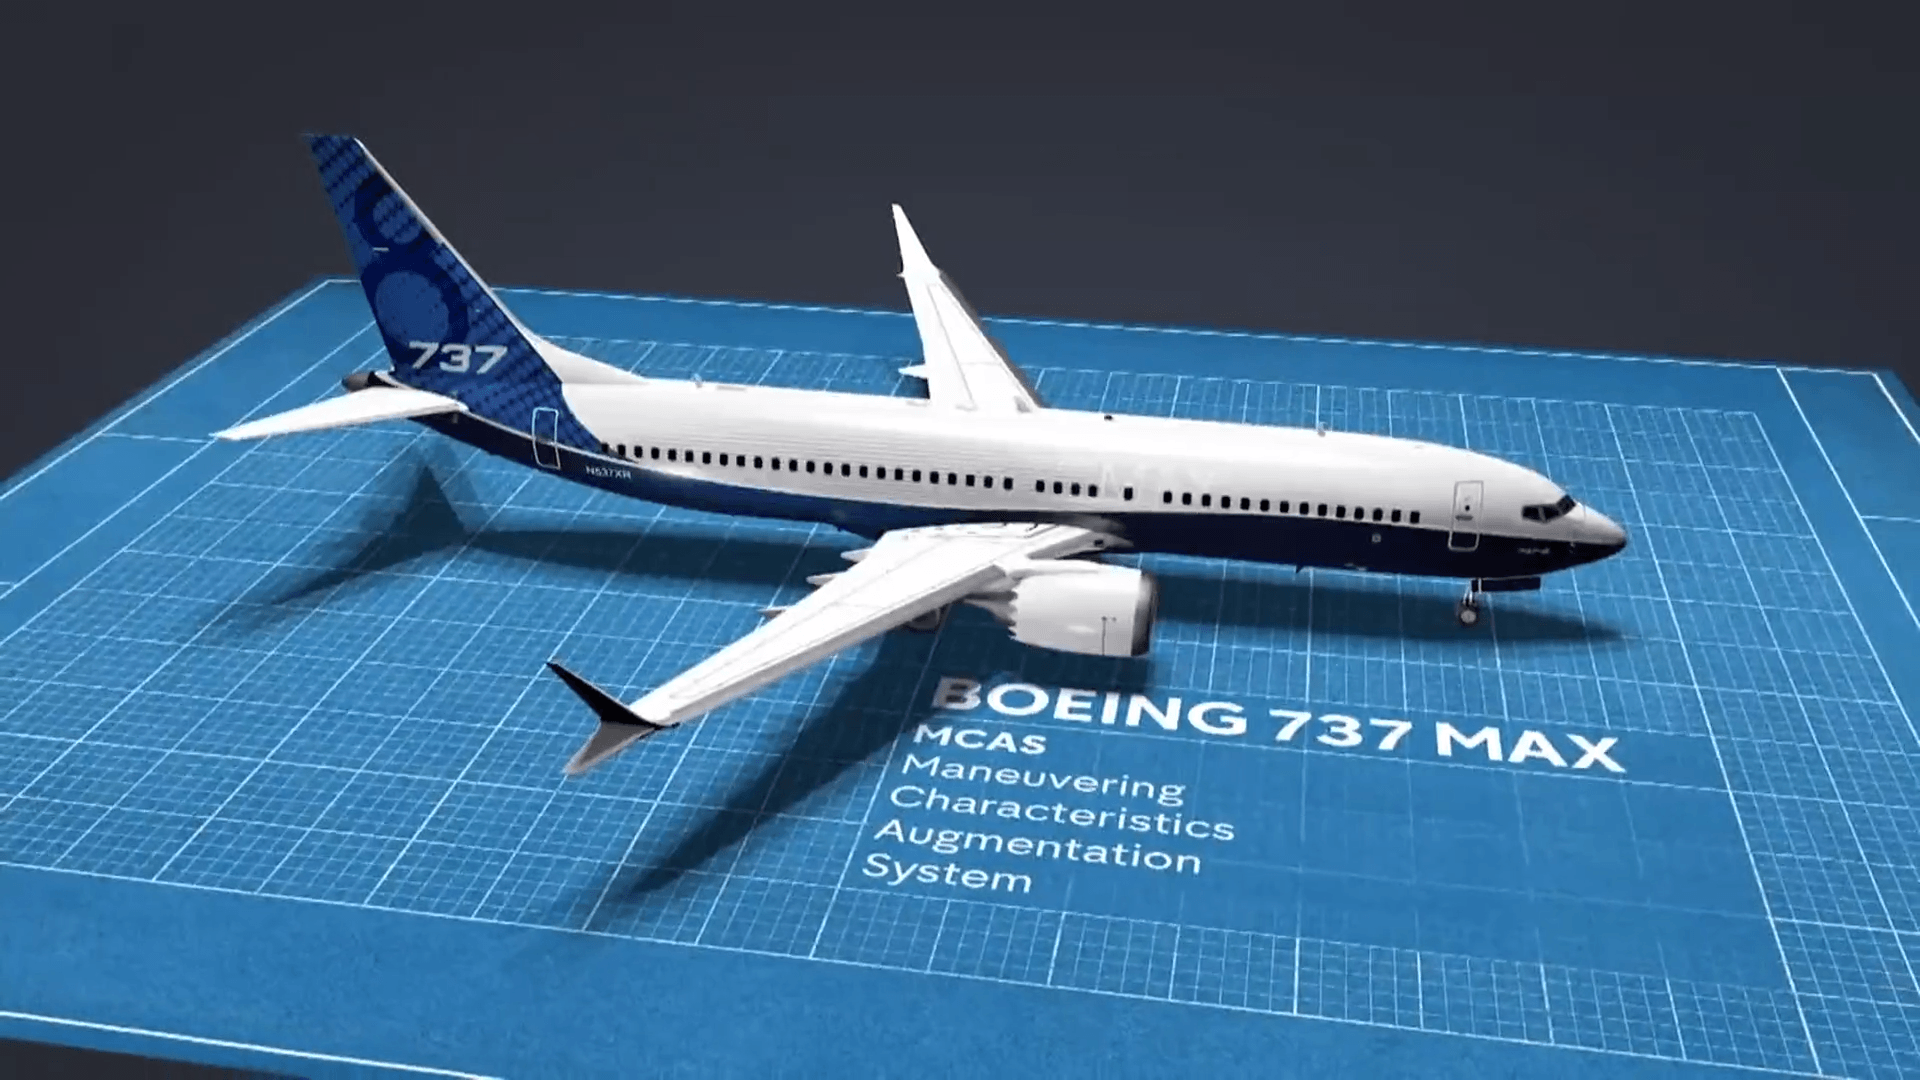 Boeing unveils software fix for 737 Max after fatal crashes